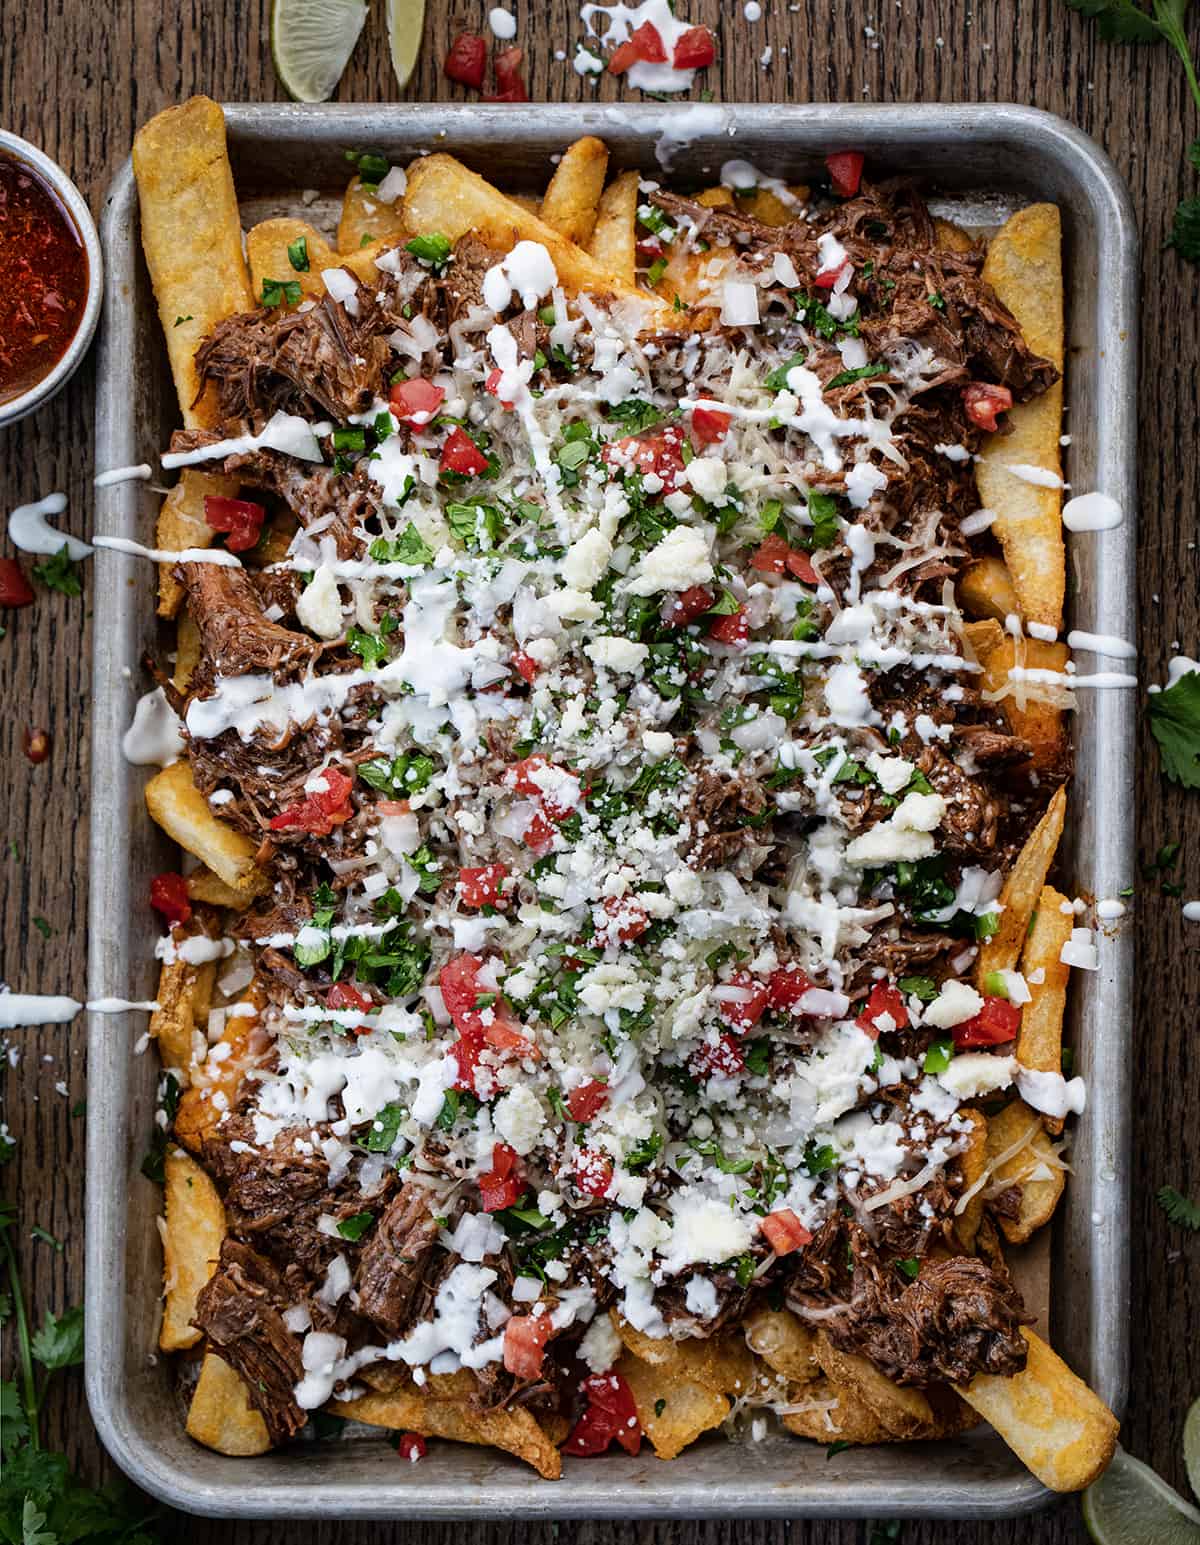 Sheet Pan of Loaded Shredded Beef {Birria} French Fries Covered in Sour Cream, Tomatoes, and Cilantro.